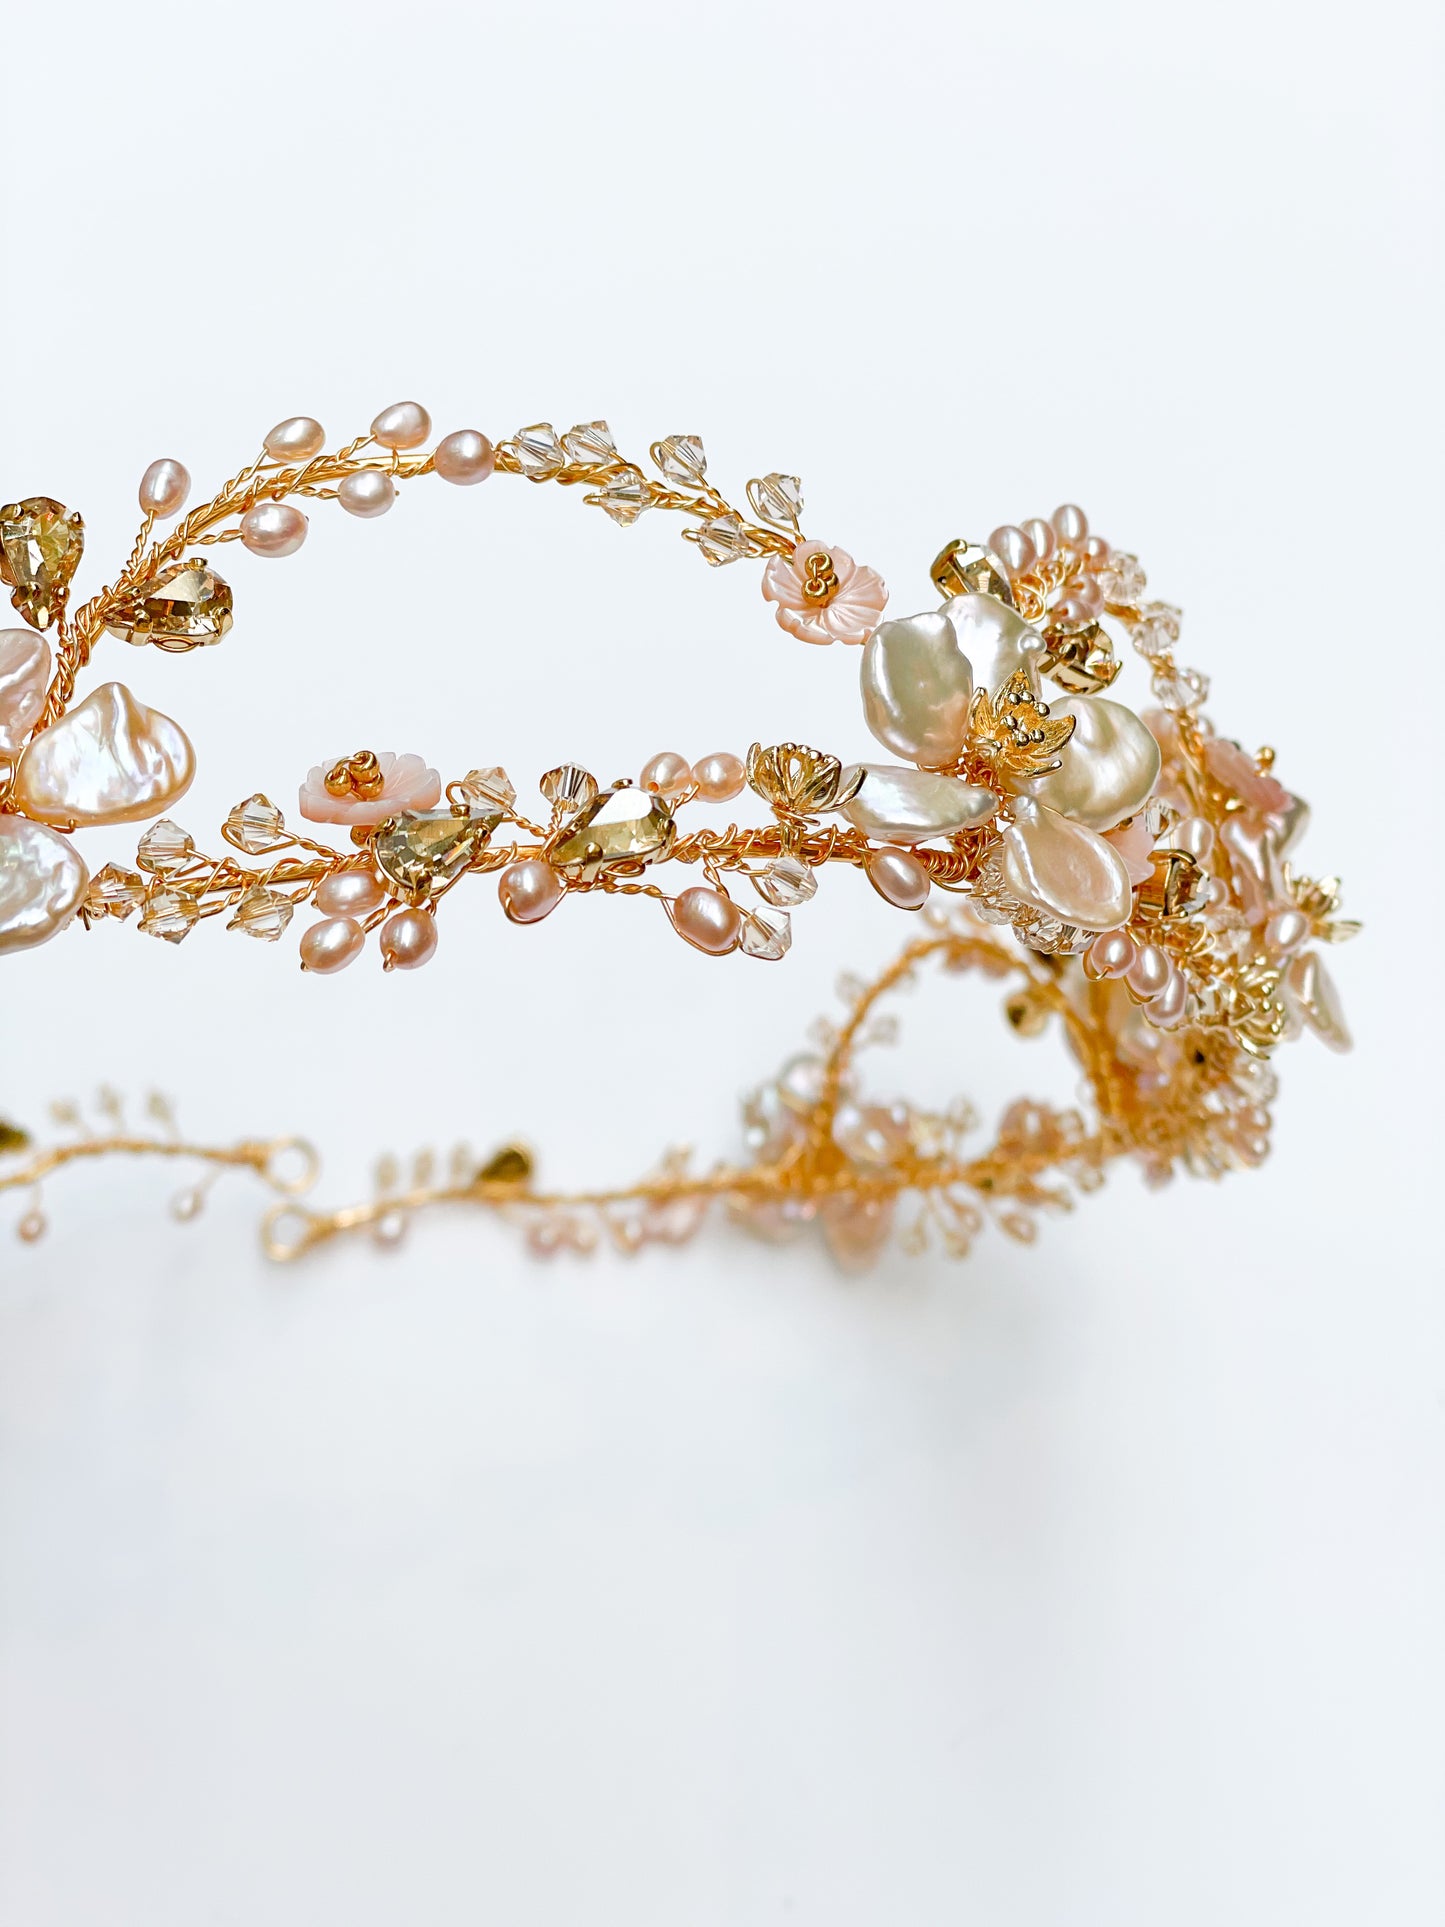 Blossom Arches Crown